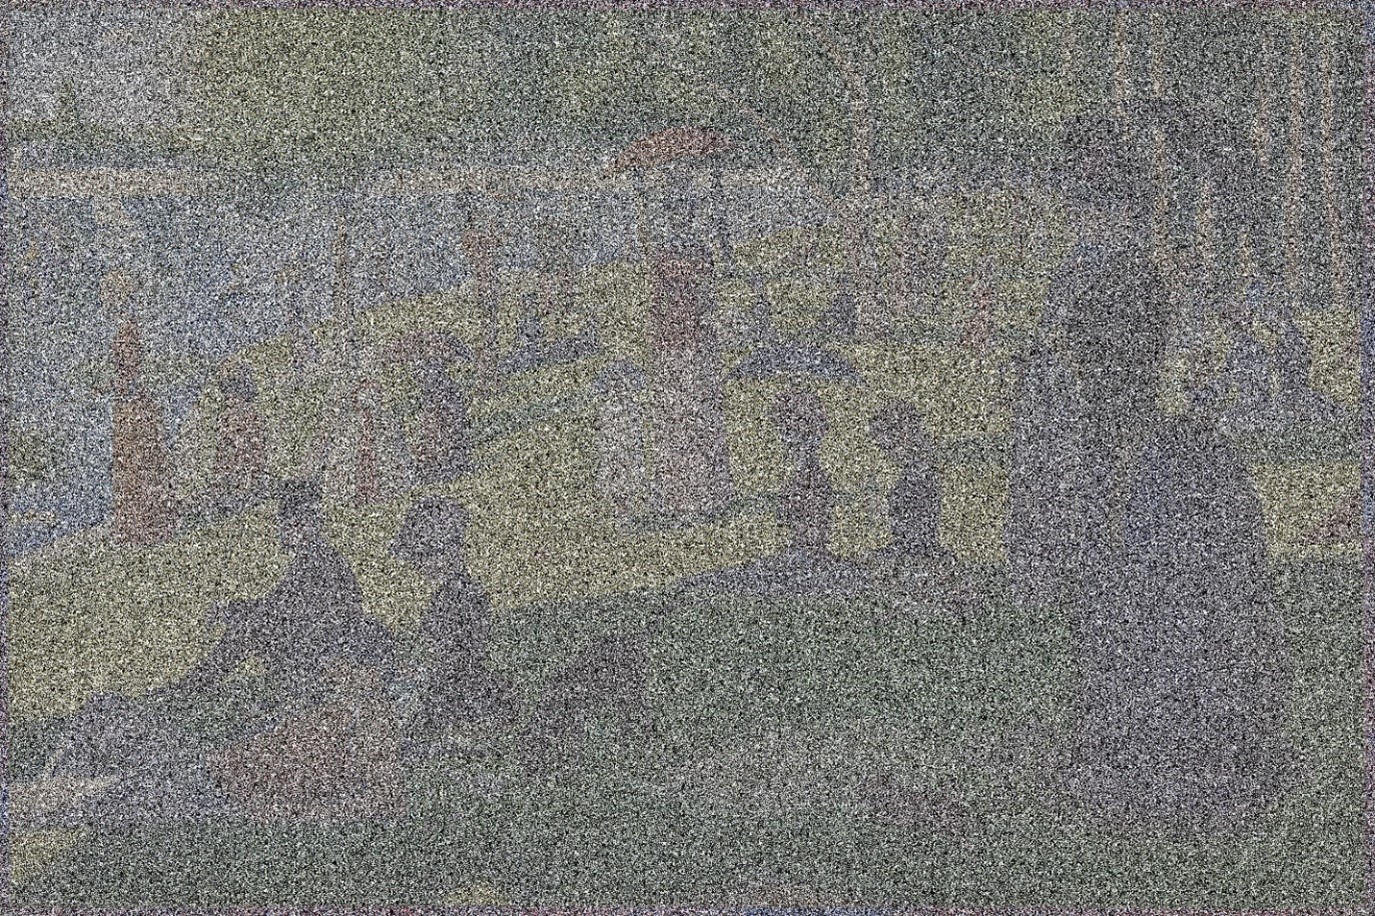 A painting depicts a crowd of individuals gathered in a park along a river. Compared with figure 3, some pixels have been randomly lightened or darkened, representing noise, which preserves privacy by obscuring the original values.